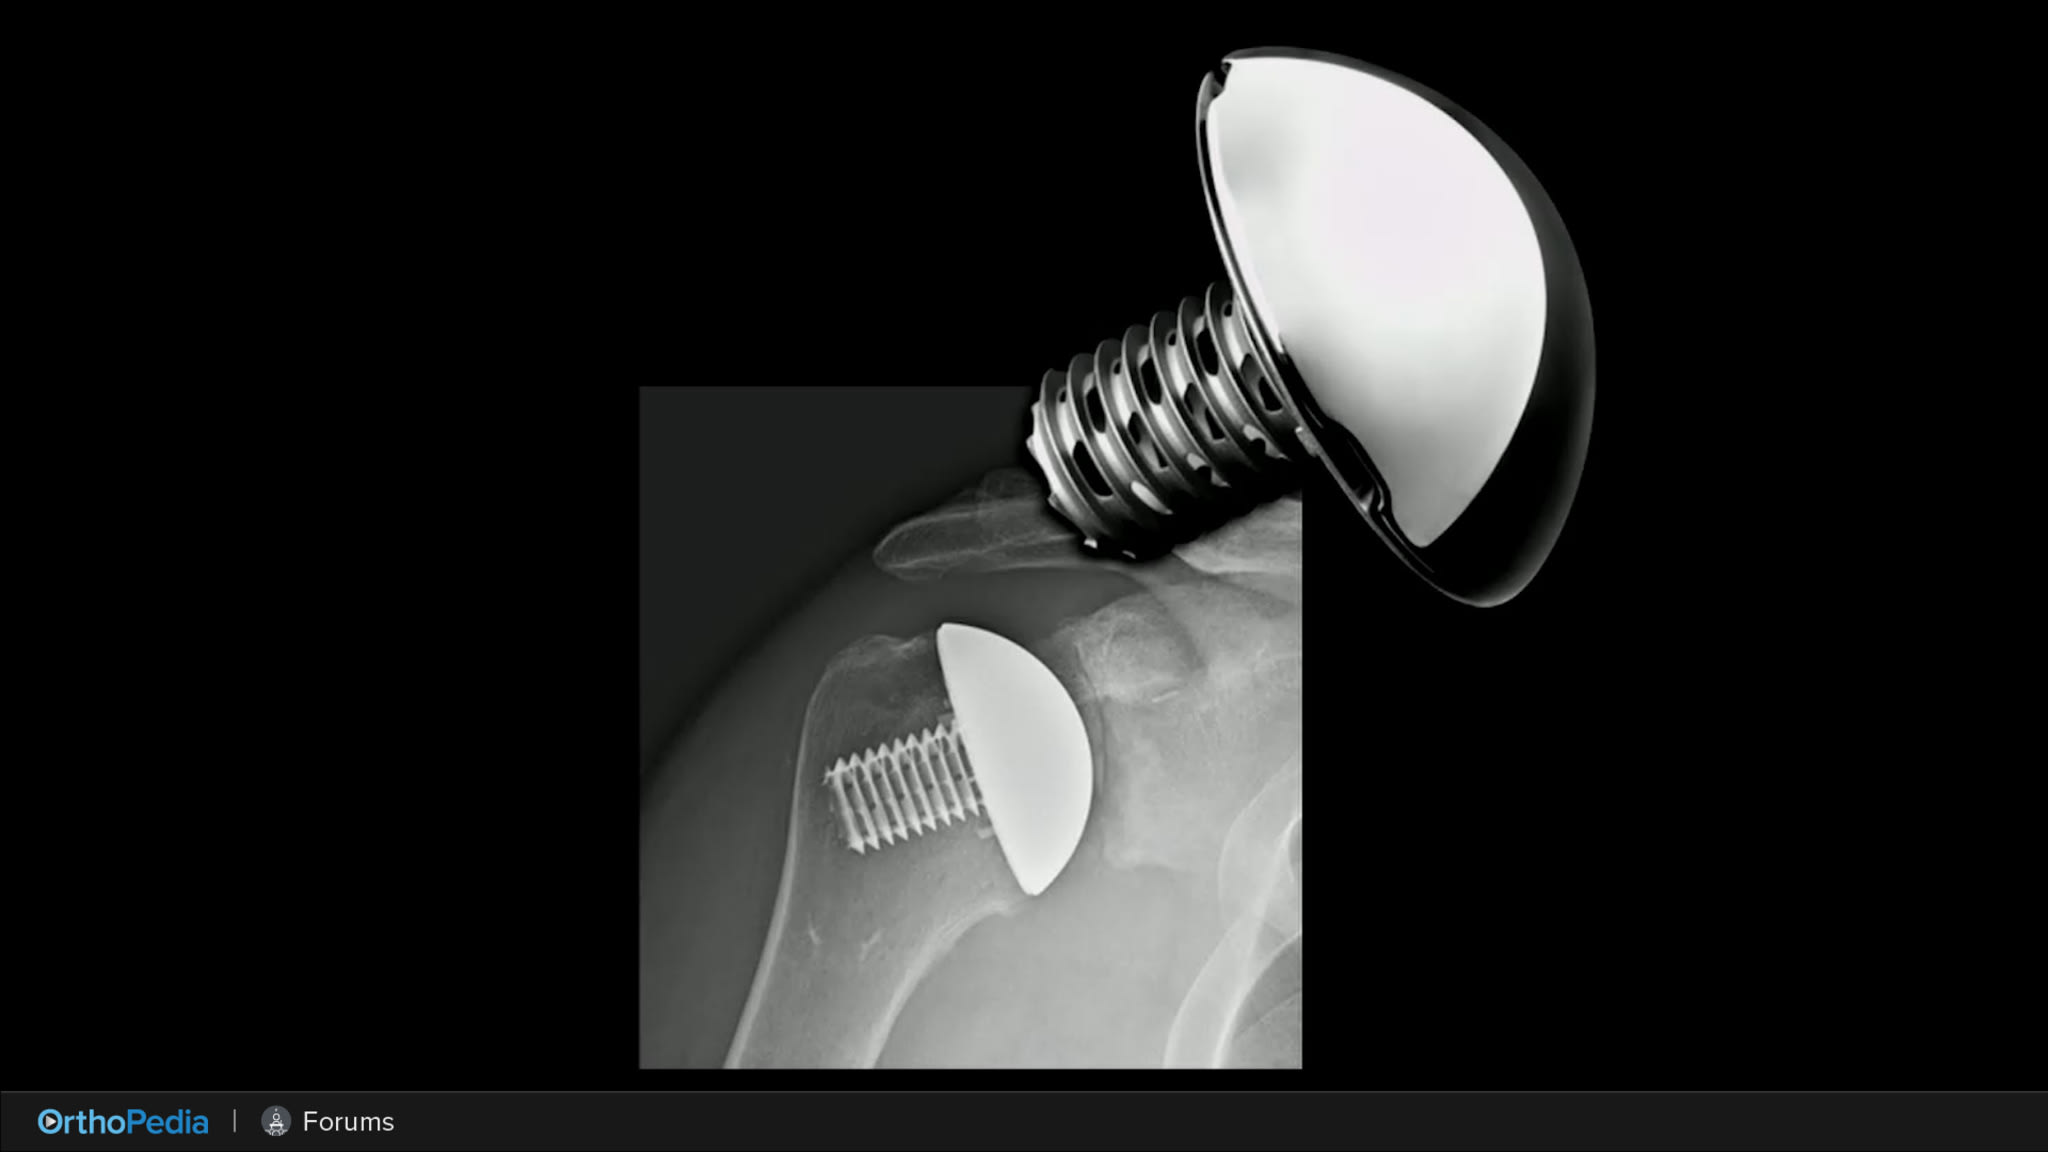 OTIF: The US Experience in Stemless Arthroplasty